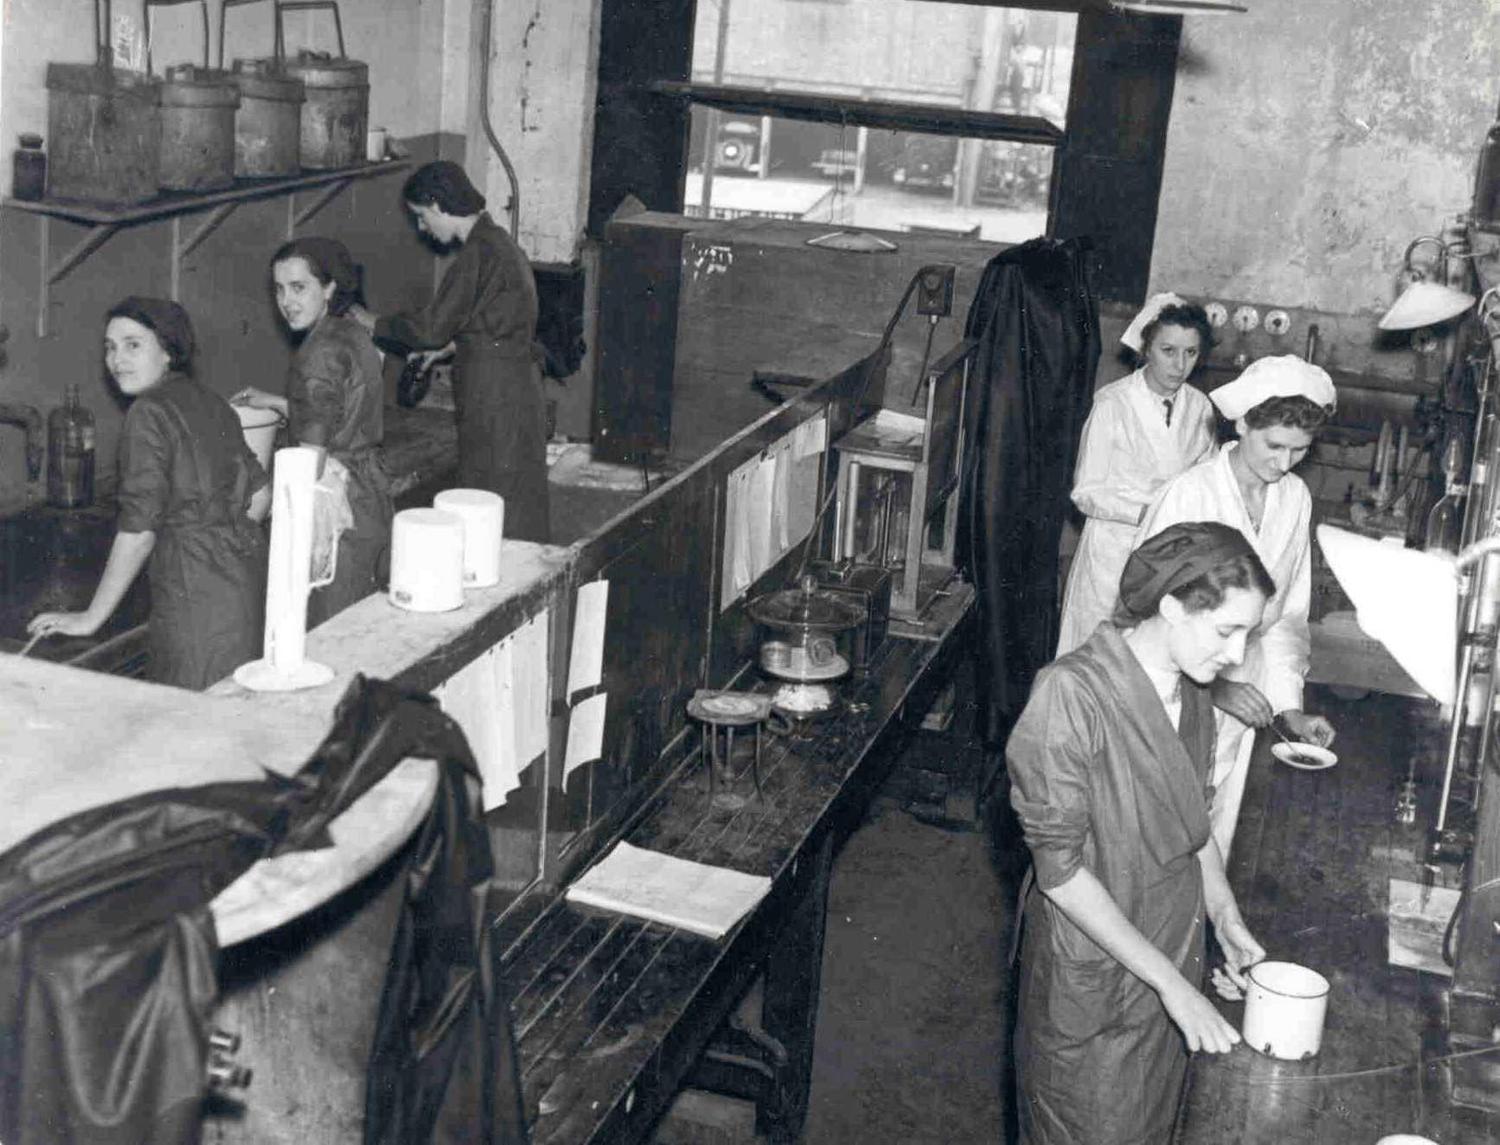 Women at work in the laboratory of the sugar beet factory c1940